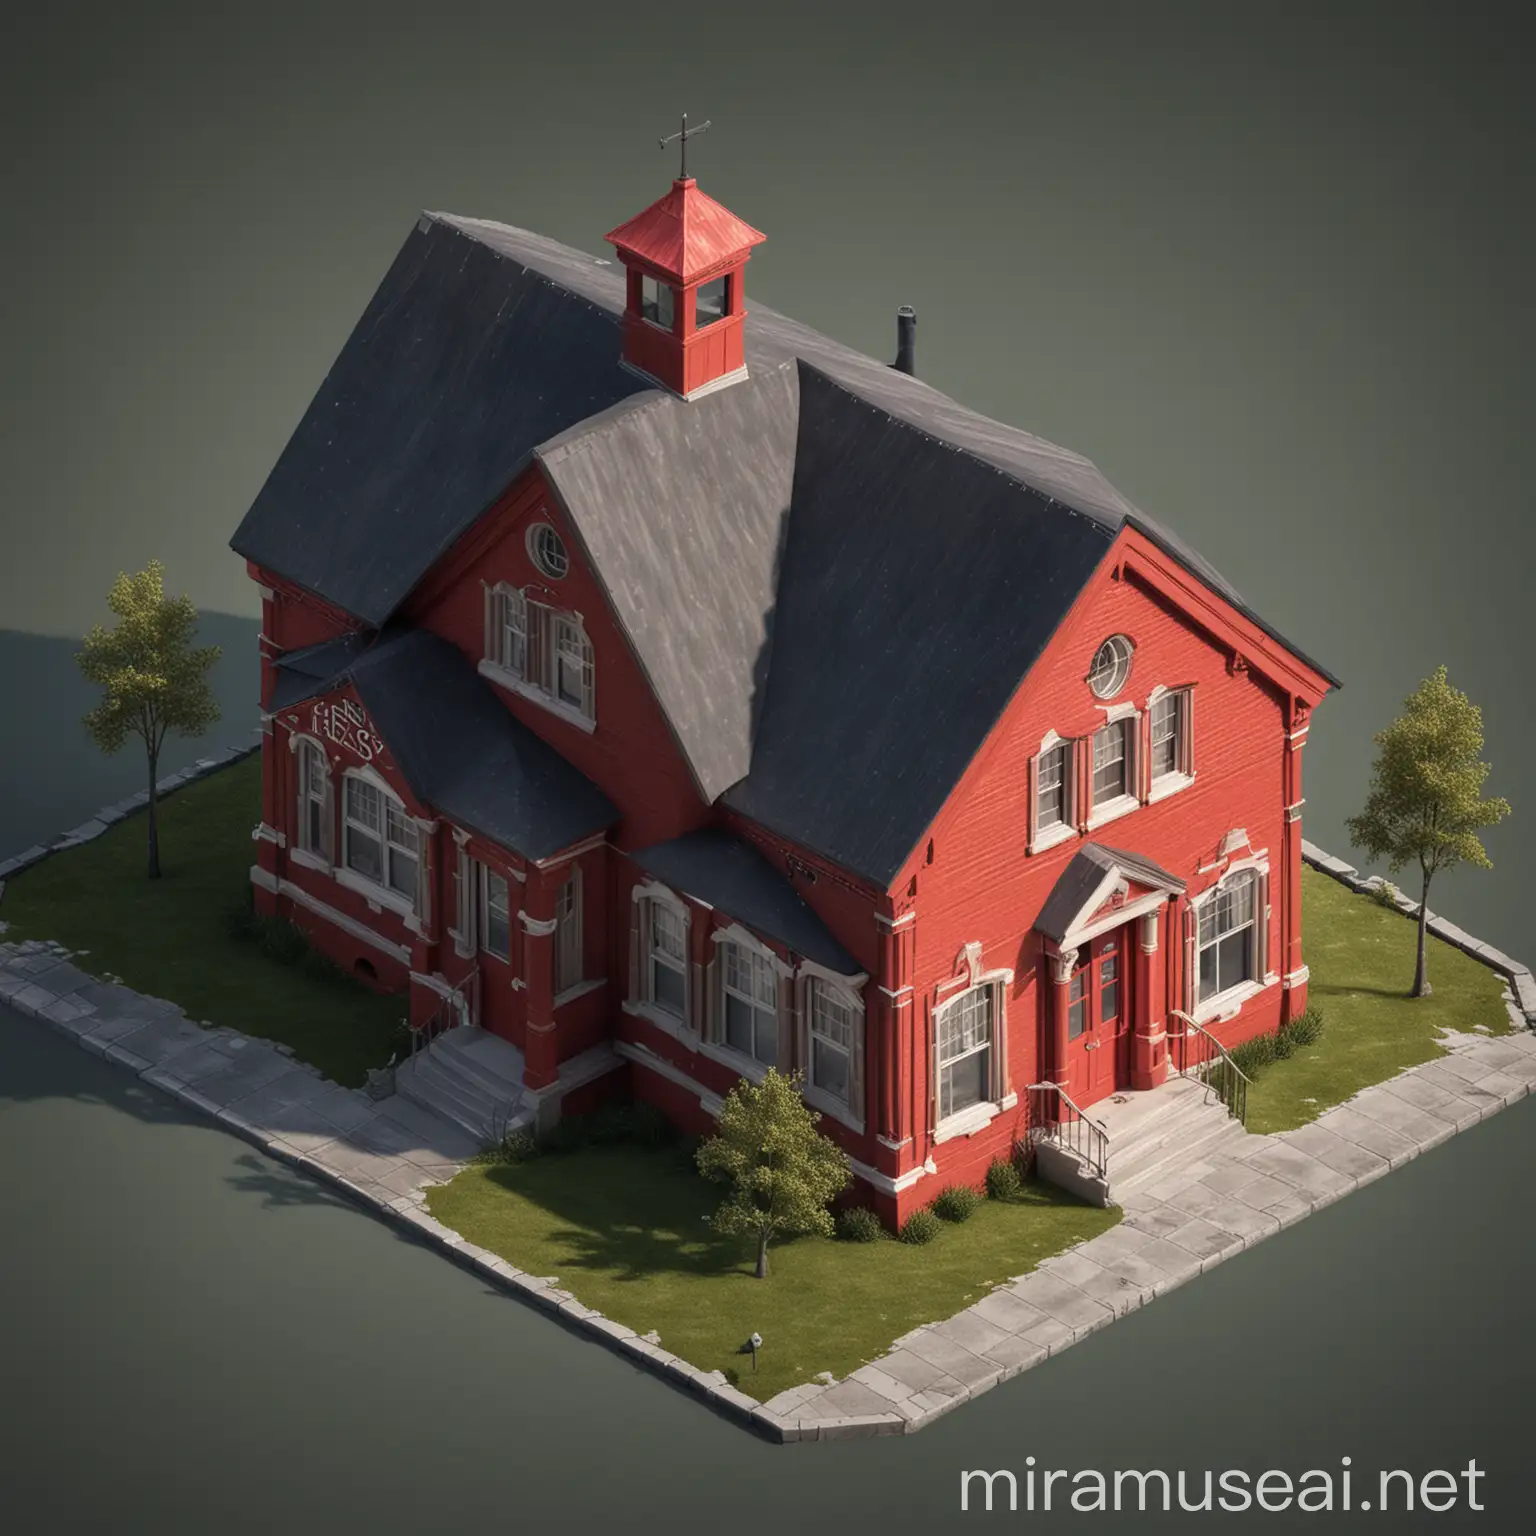 photo realistic school house isometric persepctive. the school should be red and have a dark roof. There should be a-frame entrance

